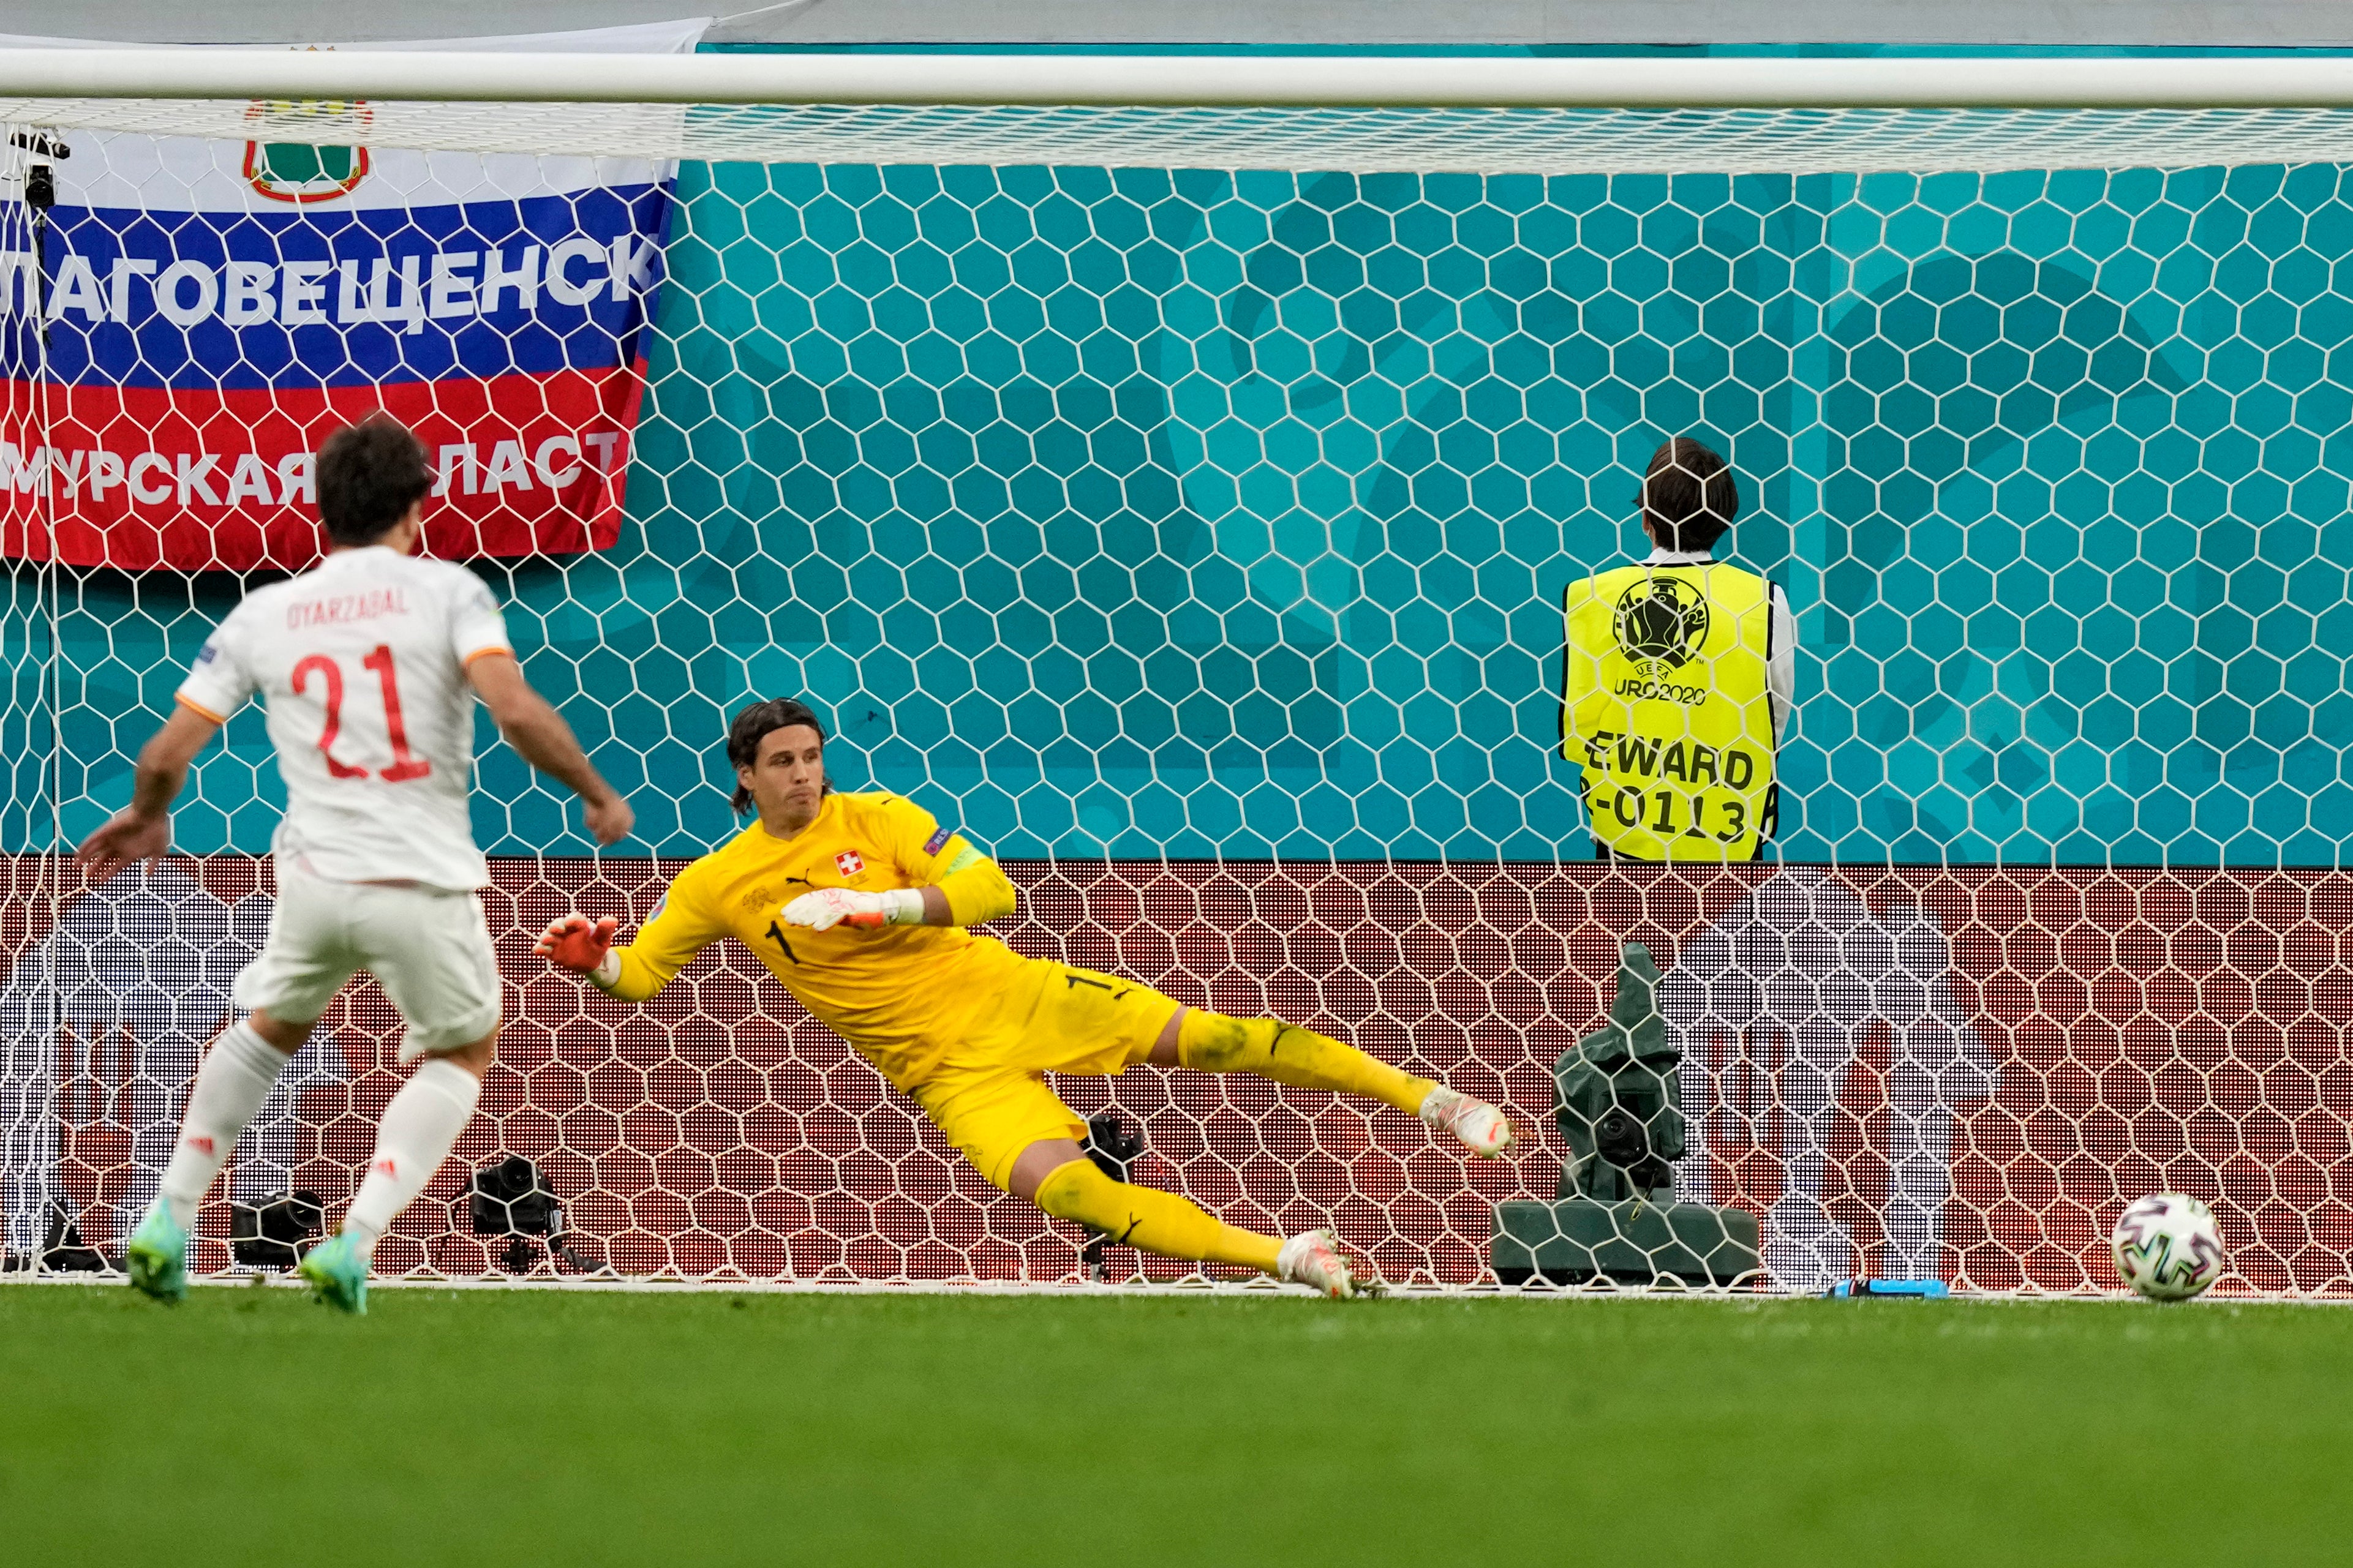 Spain’s Mikel Oyarzabal scores the winning penalty against Switzerland to book a place in the Euro 2020 semi-finals